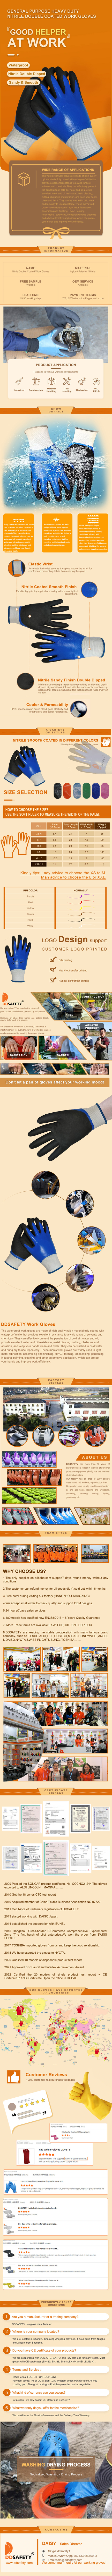 Waterproof Work Gloves, Cut Resistant Gloves With Insulated Double Latex Plam Coated - DNN626 Waterproof Work Gloves, Cut Resistant Gloves With Insulated Double Latex Plam Coated - DCR622 gloves,cut resistant gloves,nitrile coated gloves,Waterproof Work Gloves,Insulated Palm Coated Gloves